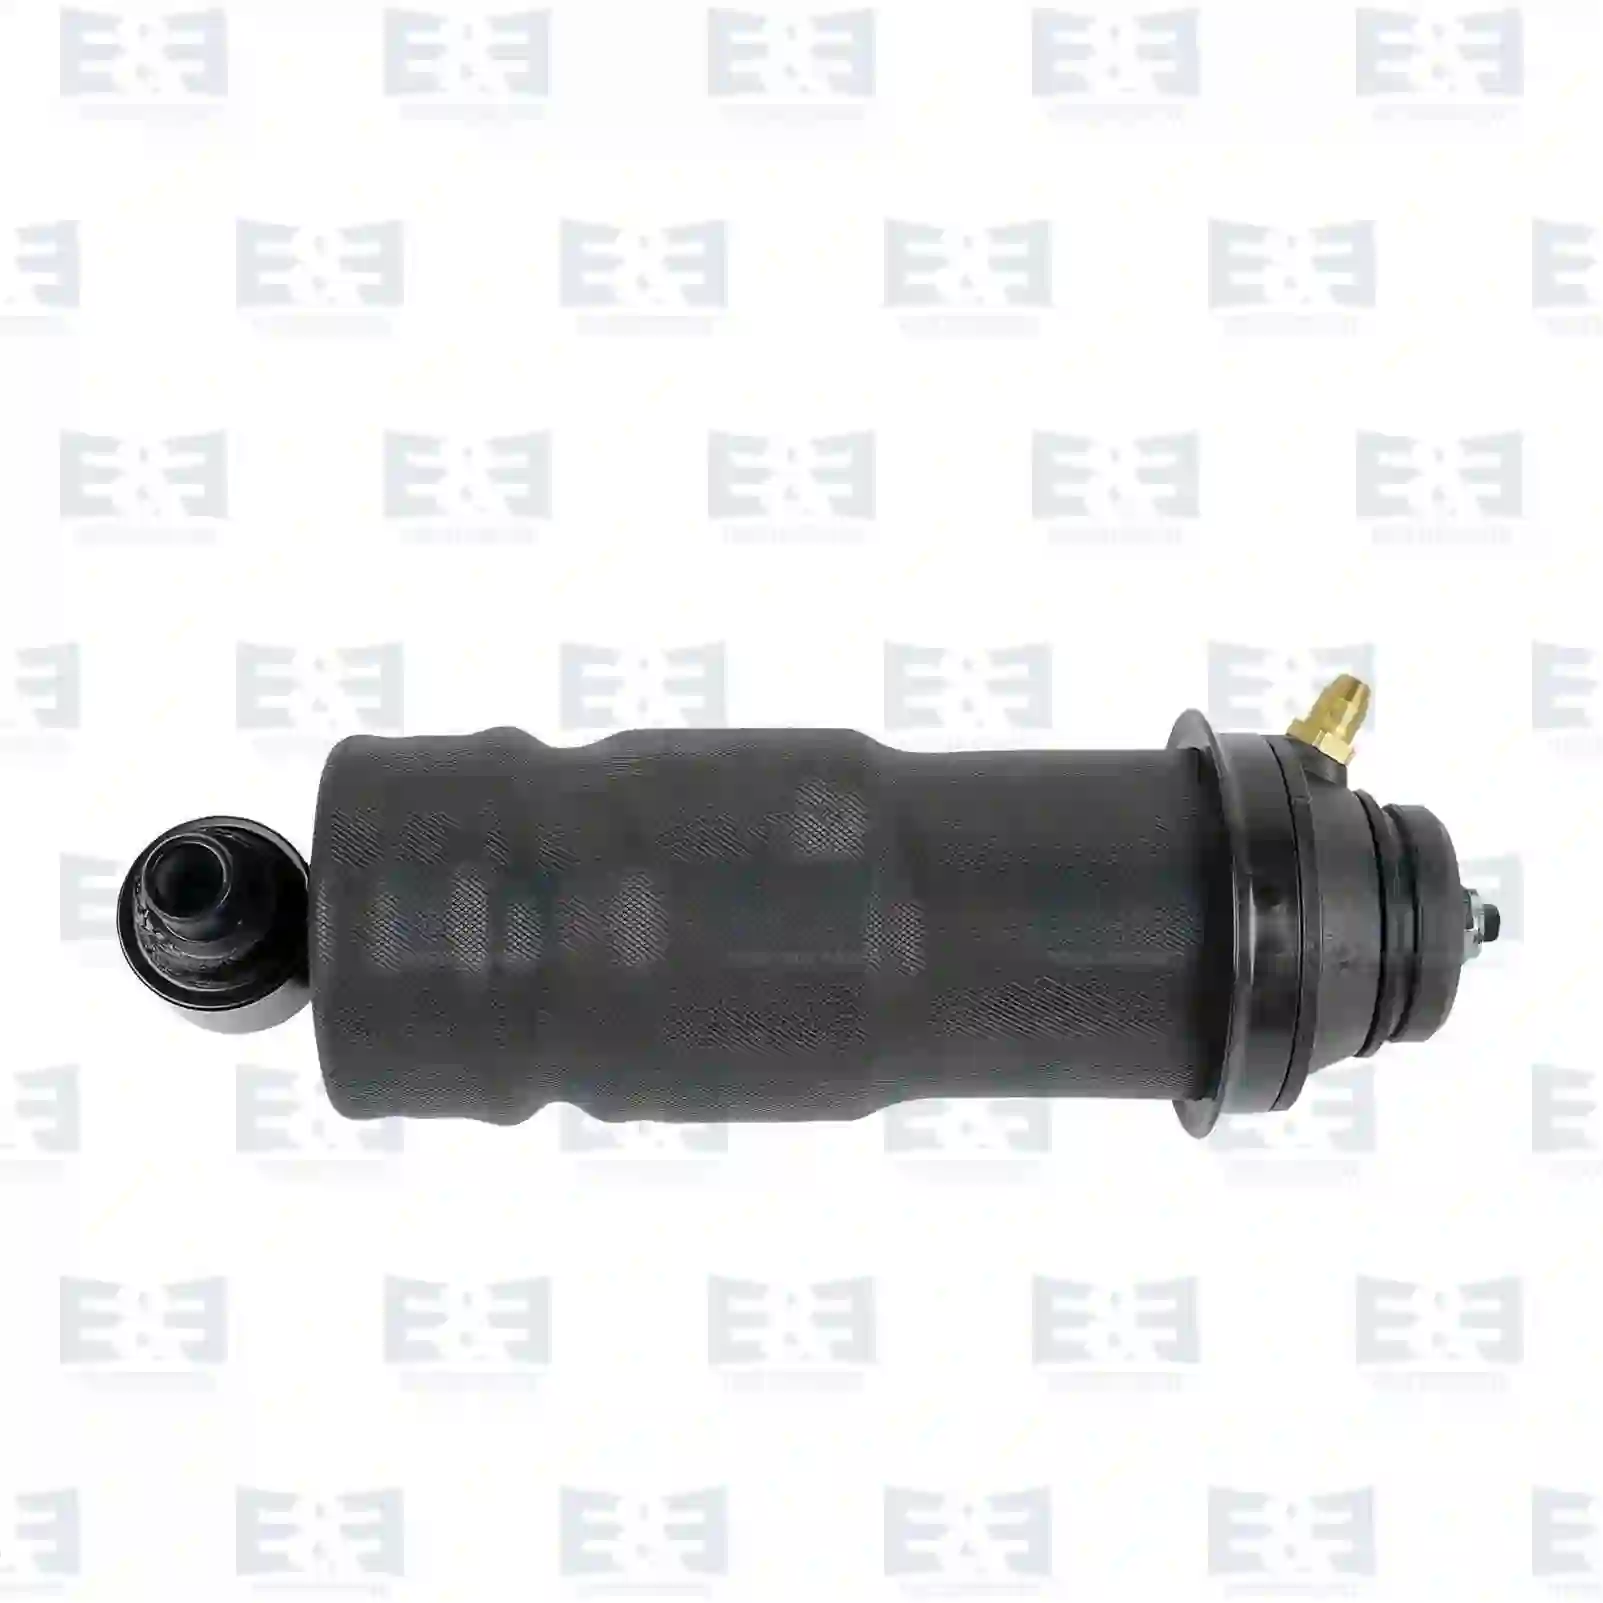  Cabin shock absorber, with air bellow || E&E Truck Spare Parts | Truck Spare Parts, Auotomotive Spare Parts